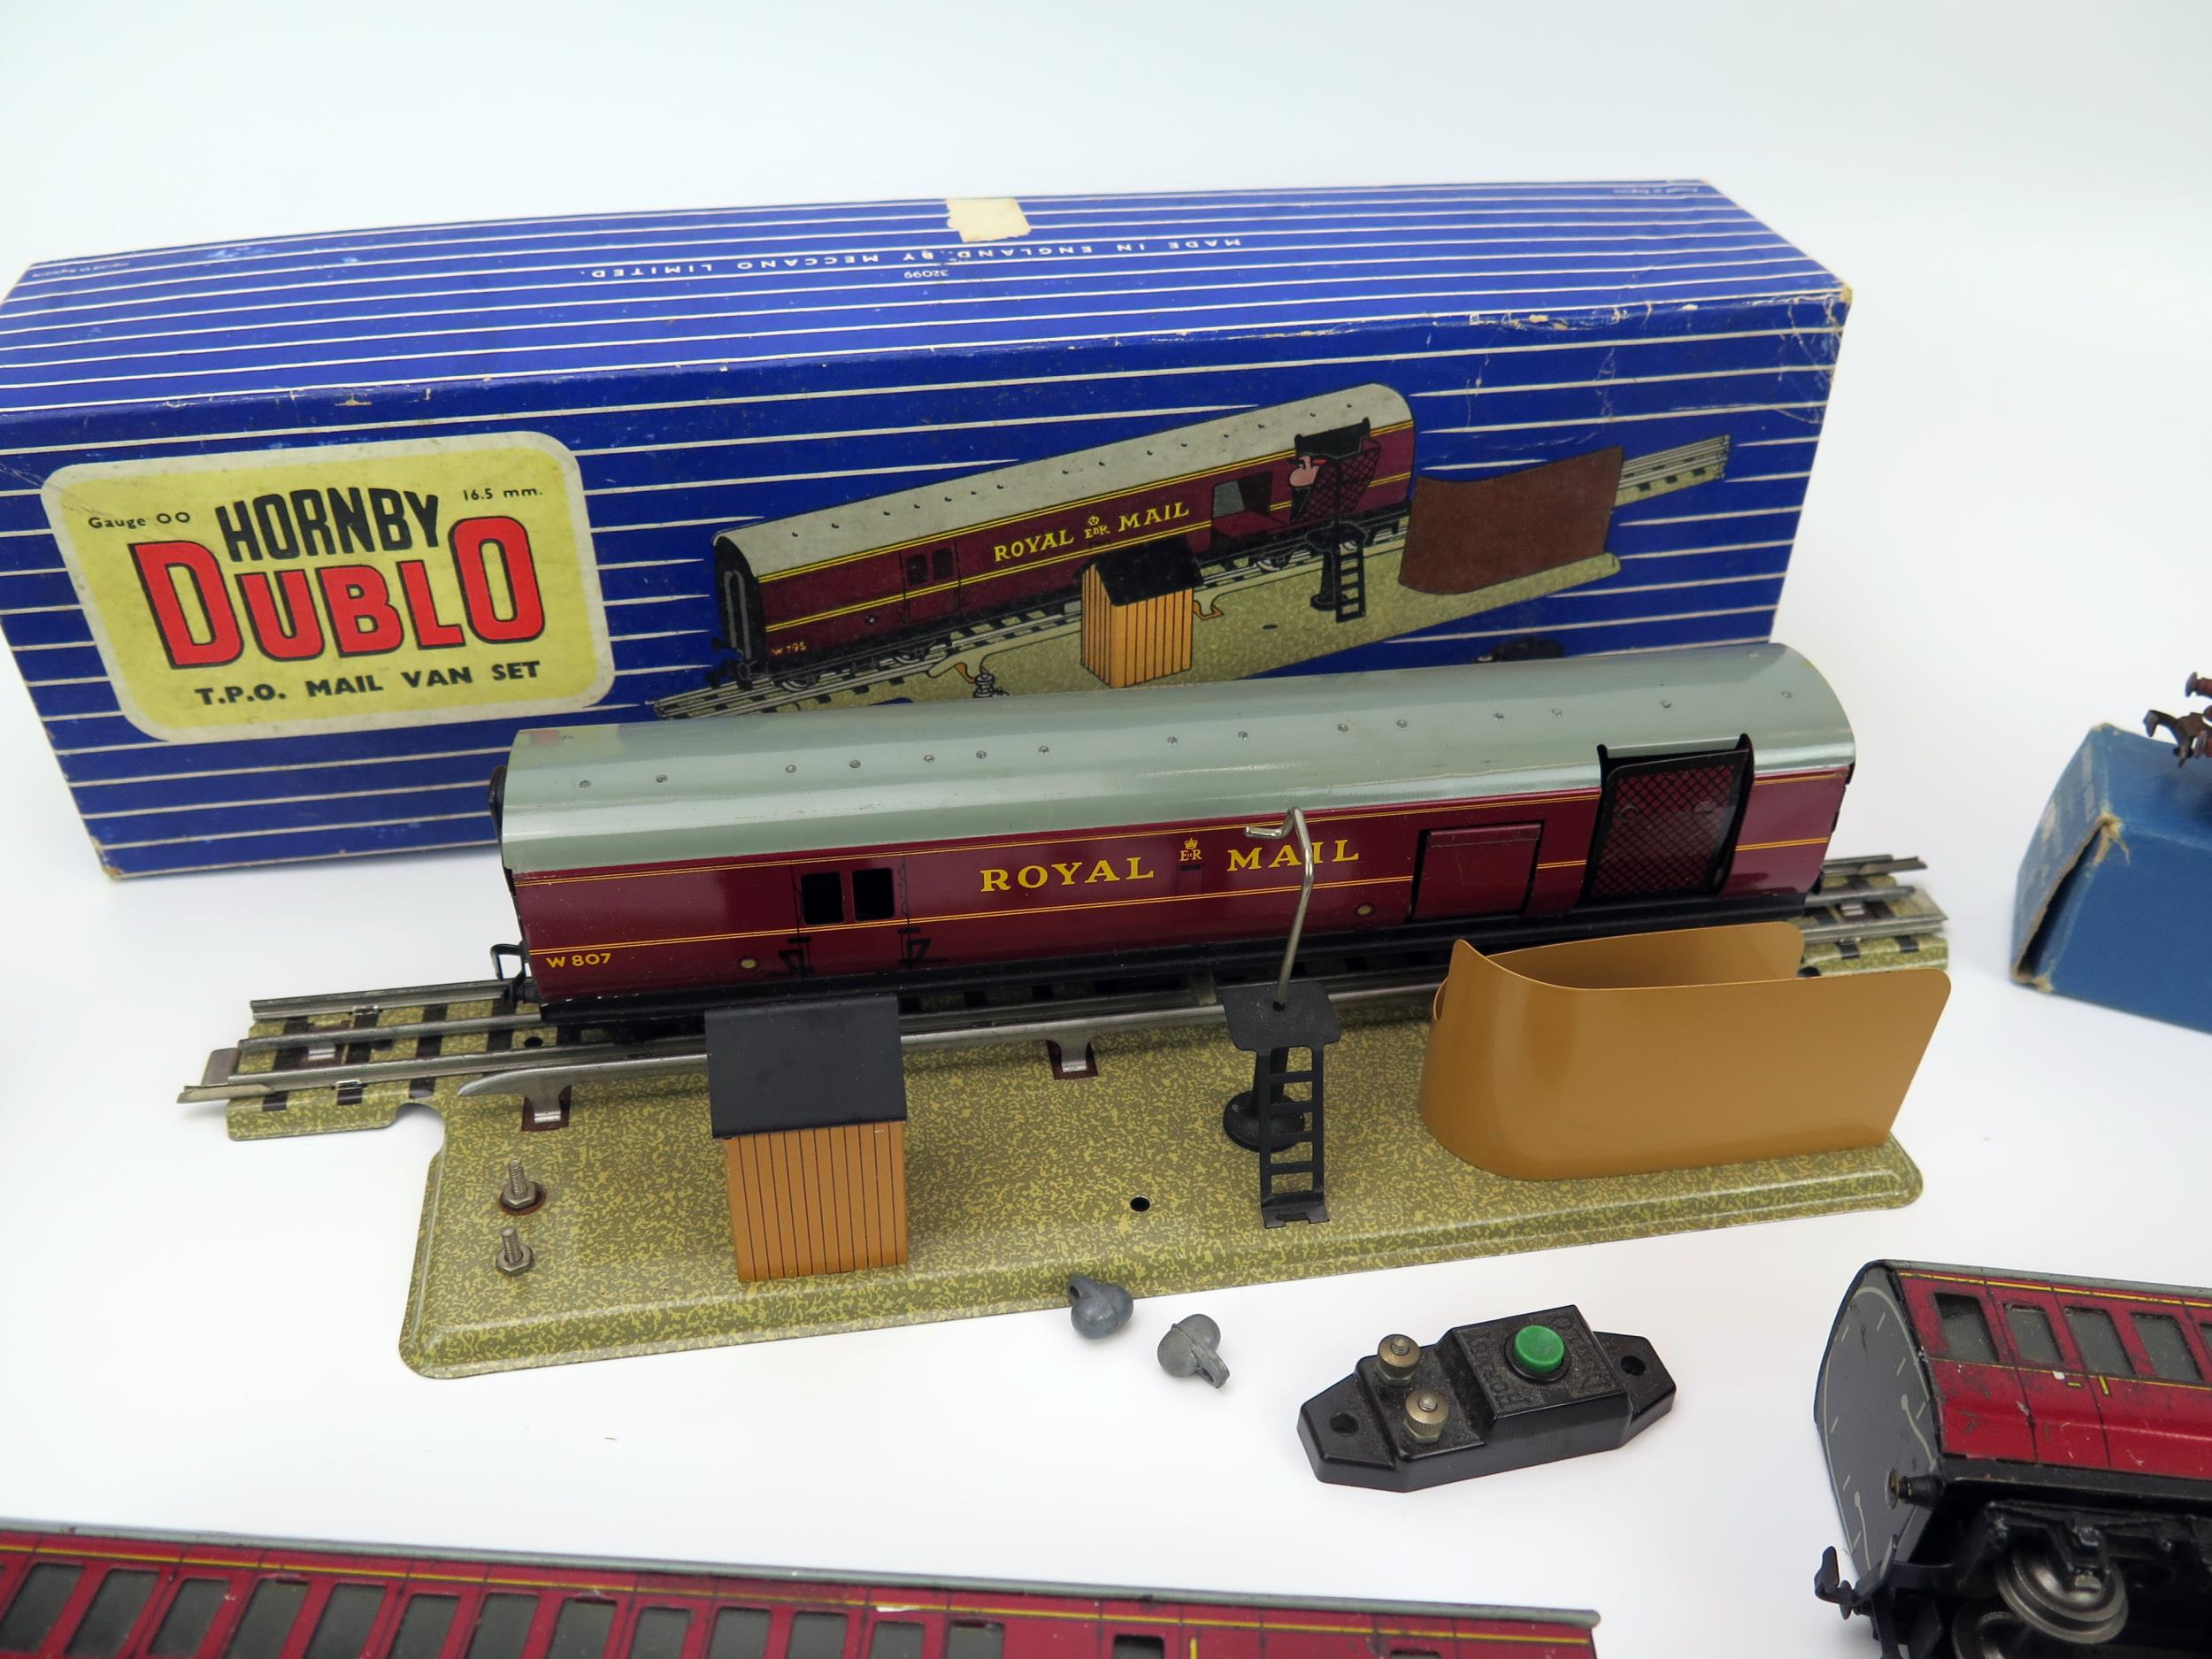 Hornby Dublo OO Gauge Coach Group - T.P.O Mail Van Set "ROYAL MAIL" (boxed), x2 32092/ x2 32093 - Image 2 of 2